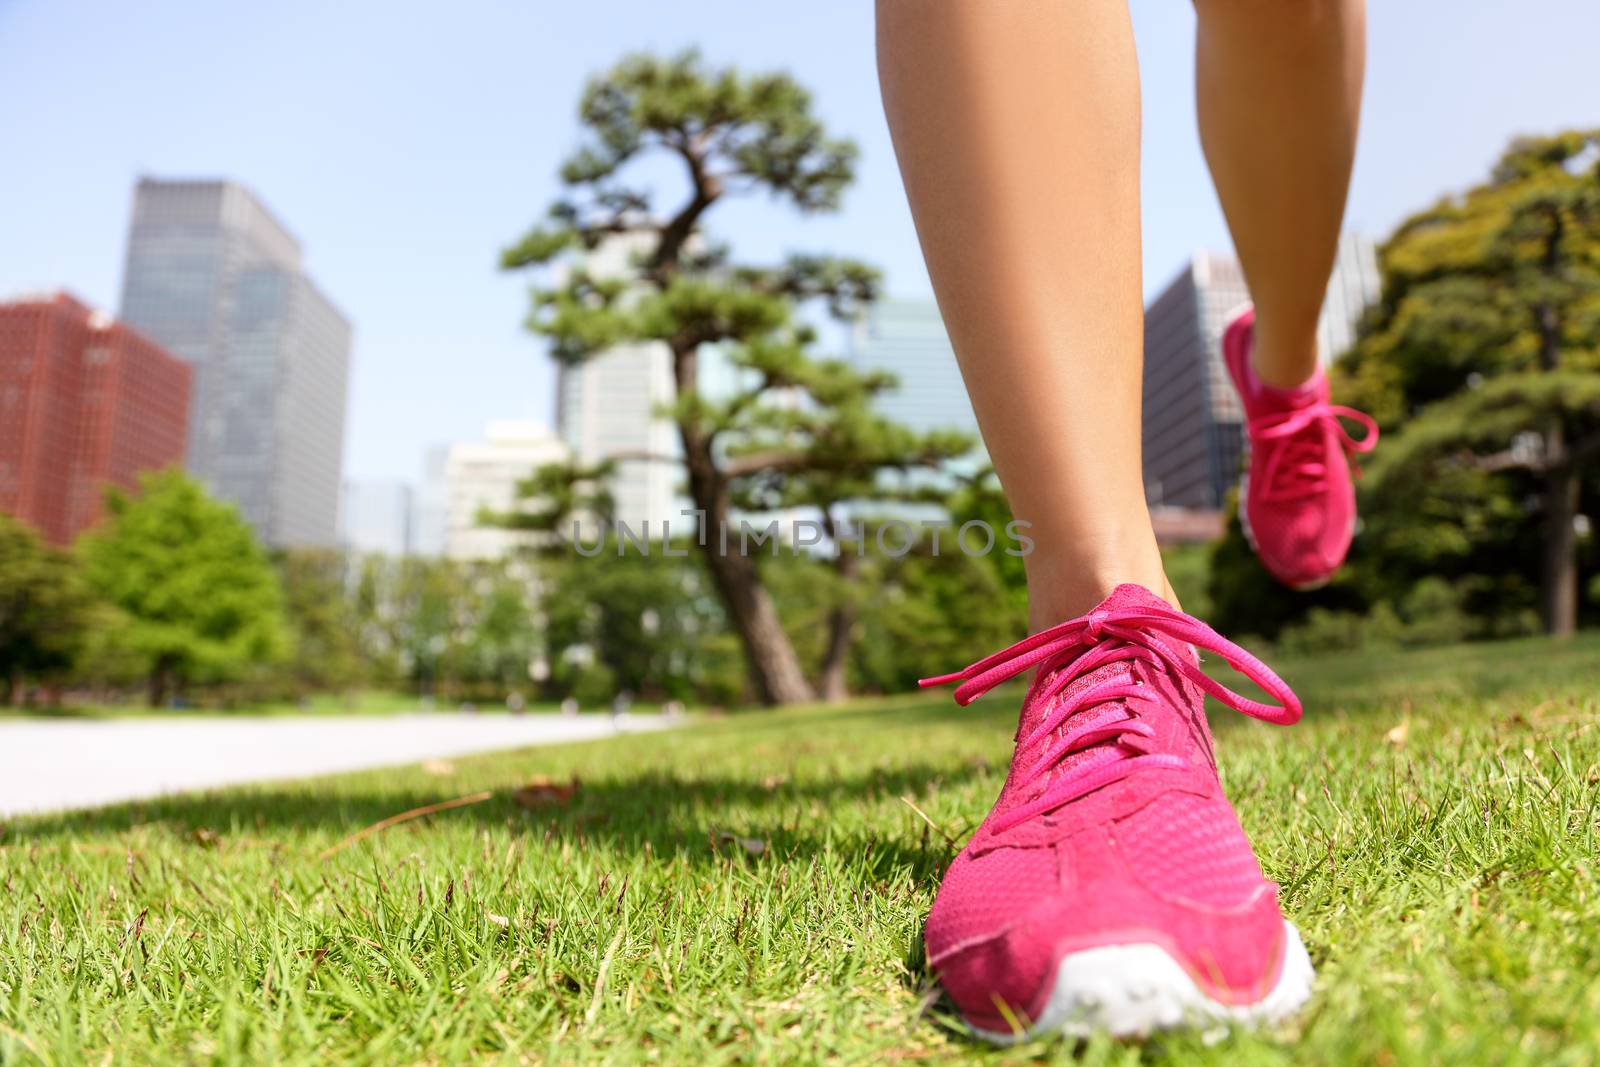 Running shoes - woman runner jogging staying fit in Tokyo Park, Japan. Closeup of pink trainers in green grass in summer park near the Imperial Palace and Ginza district downtown.